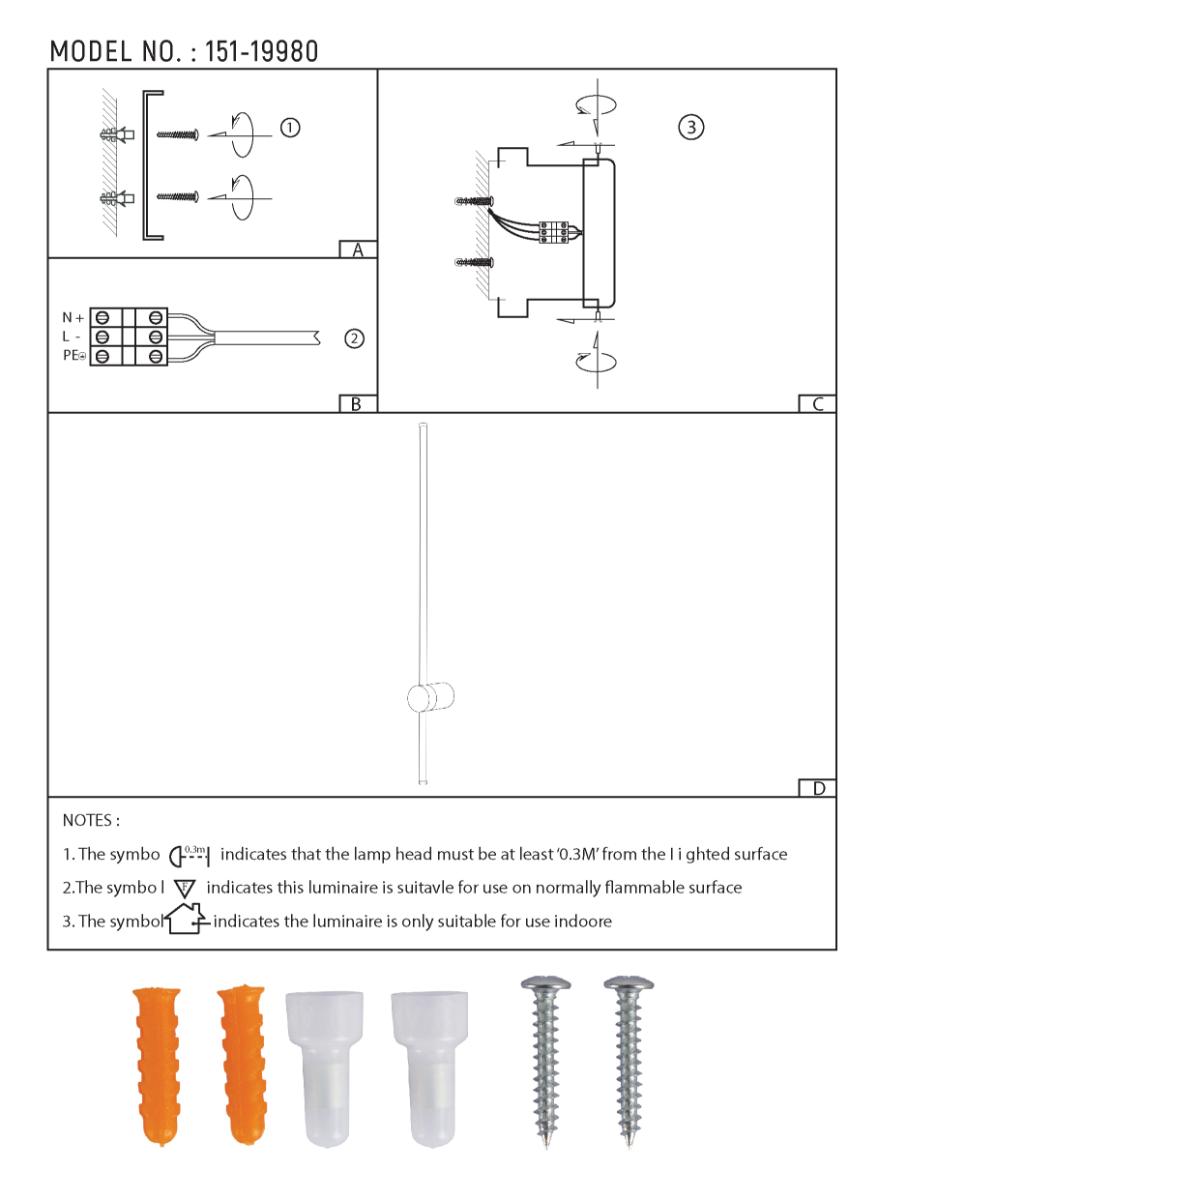 Technical specs of Minimalist Linear Wall Sconce Light 151-19980